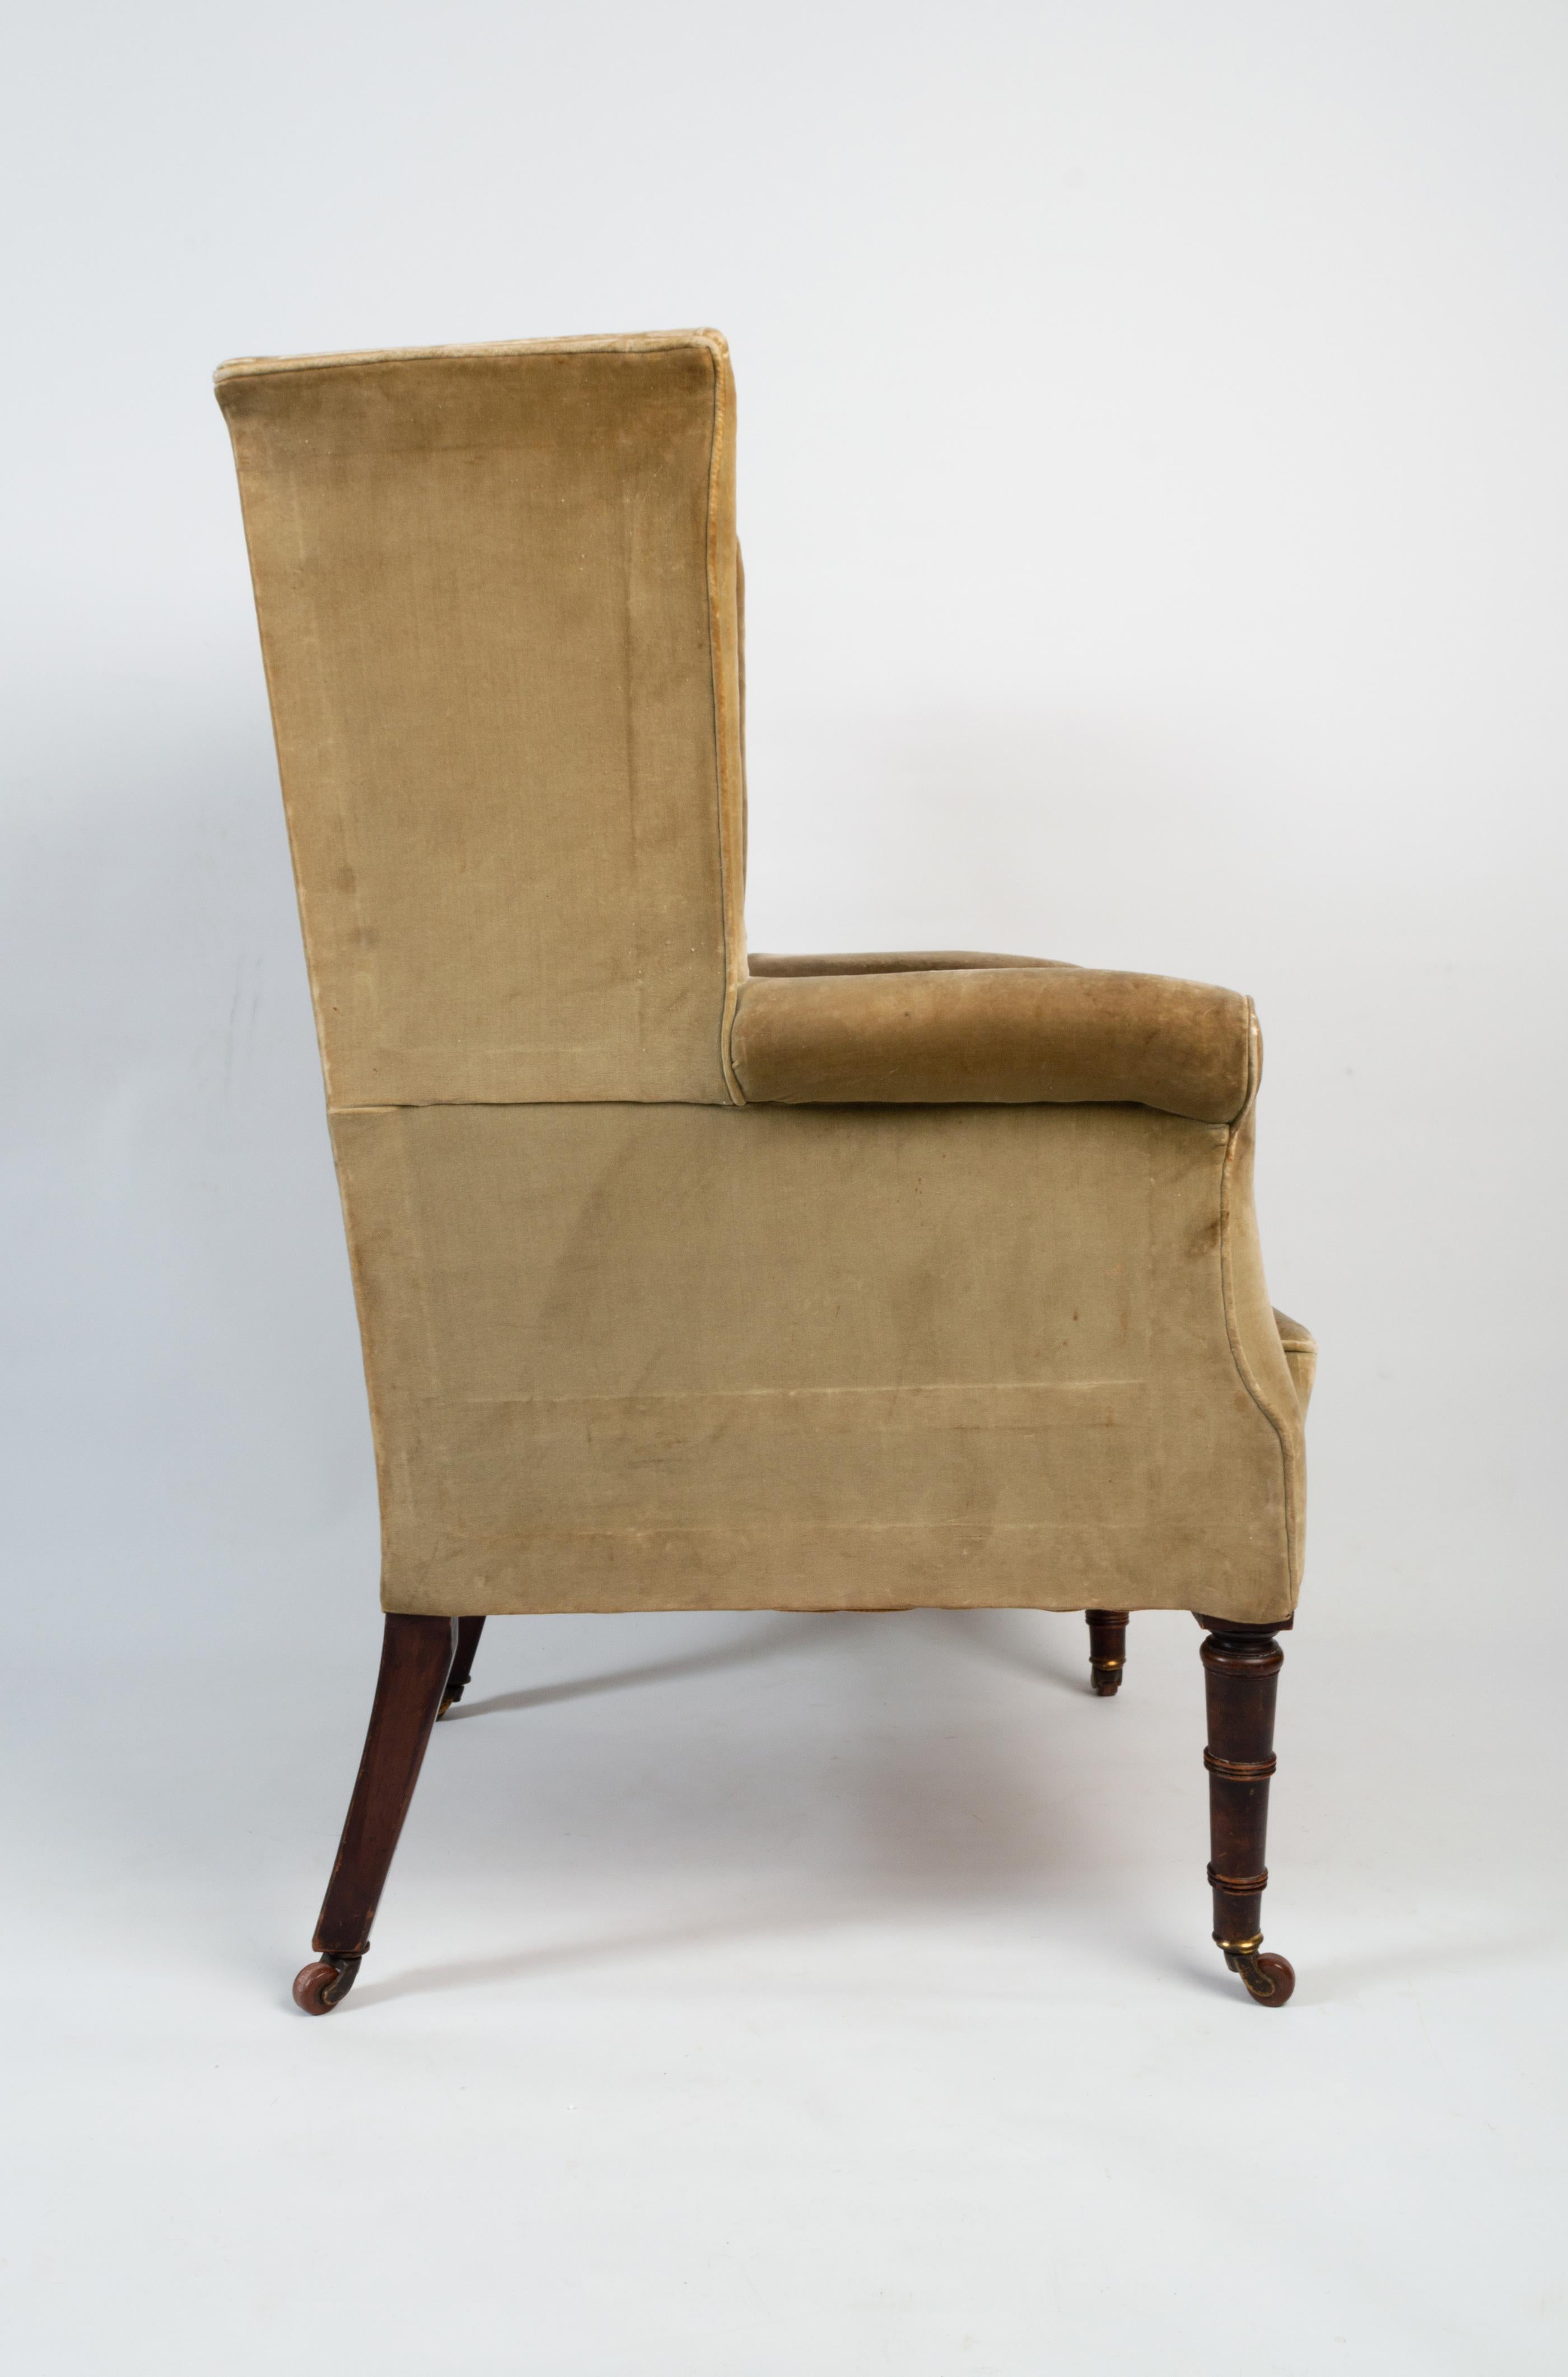 Antique English Regency Wing Armchair, circa 1820 For Sale 2